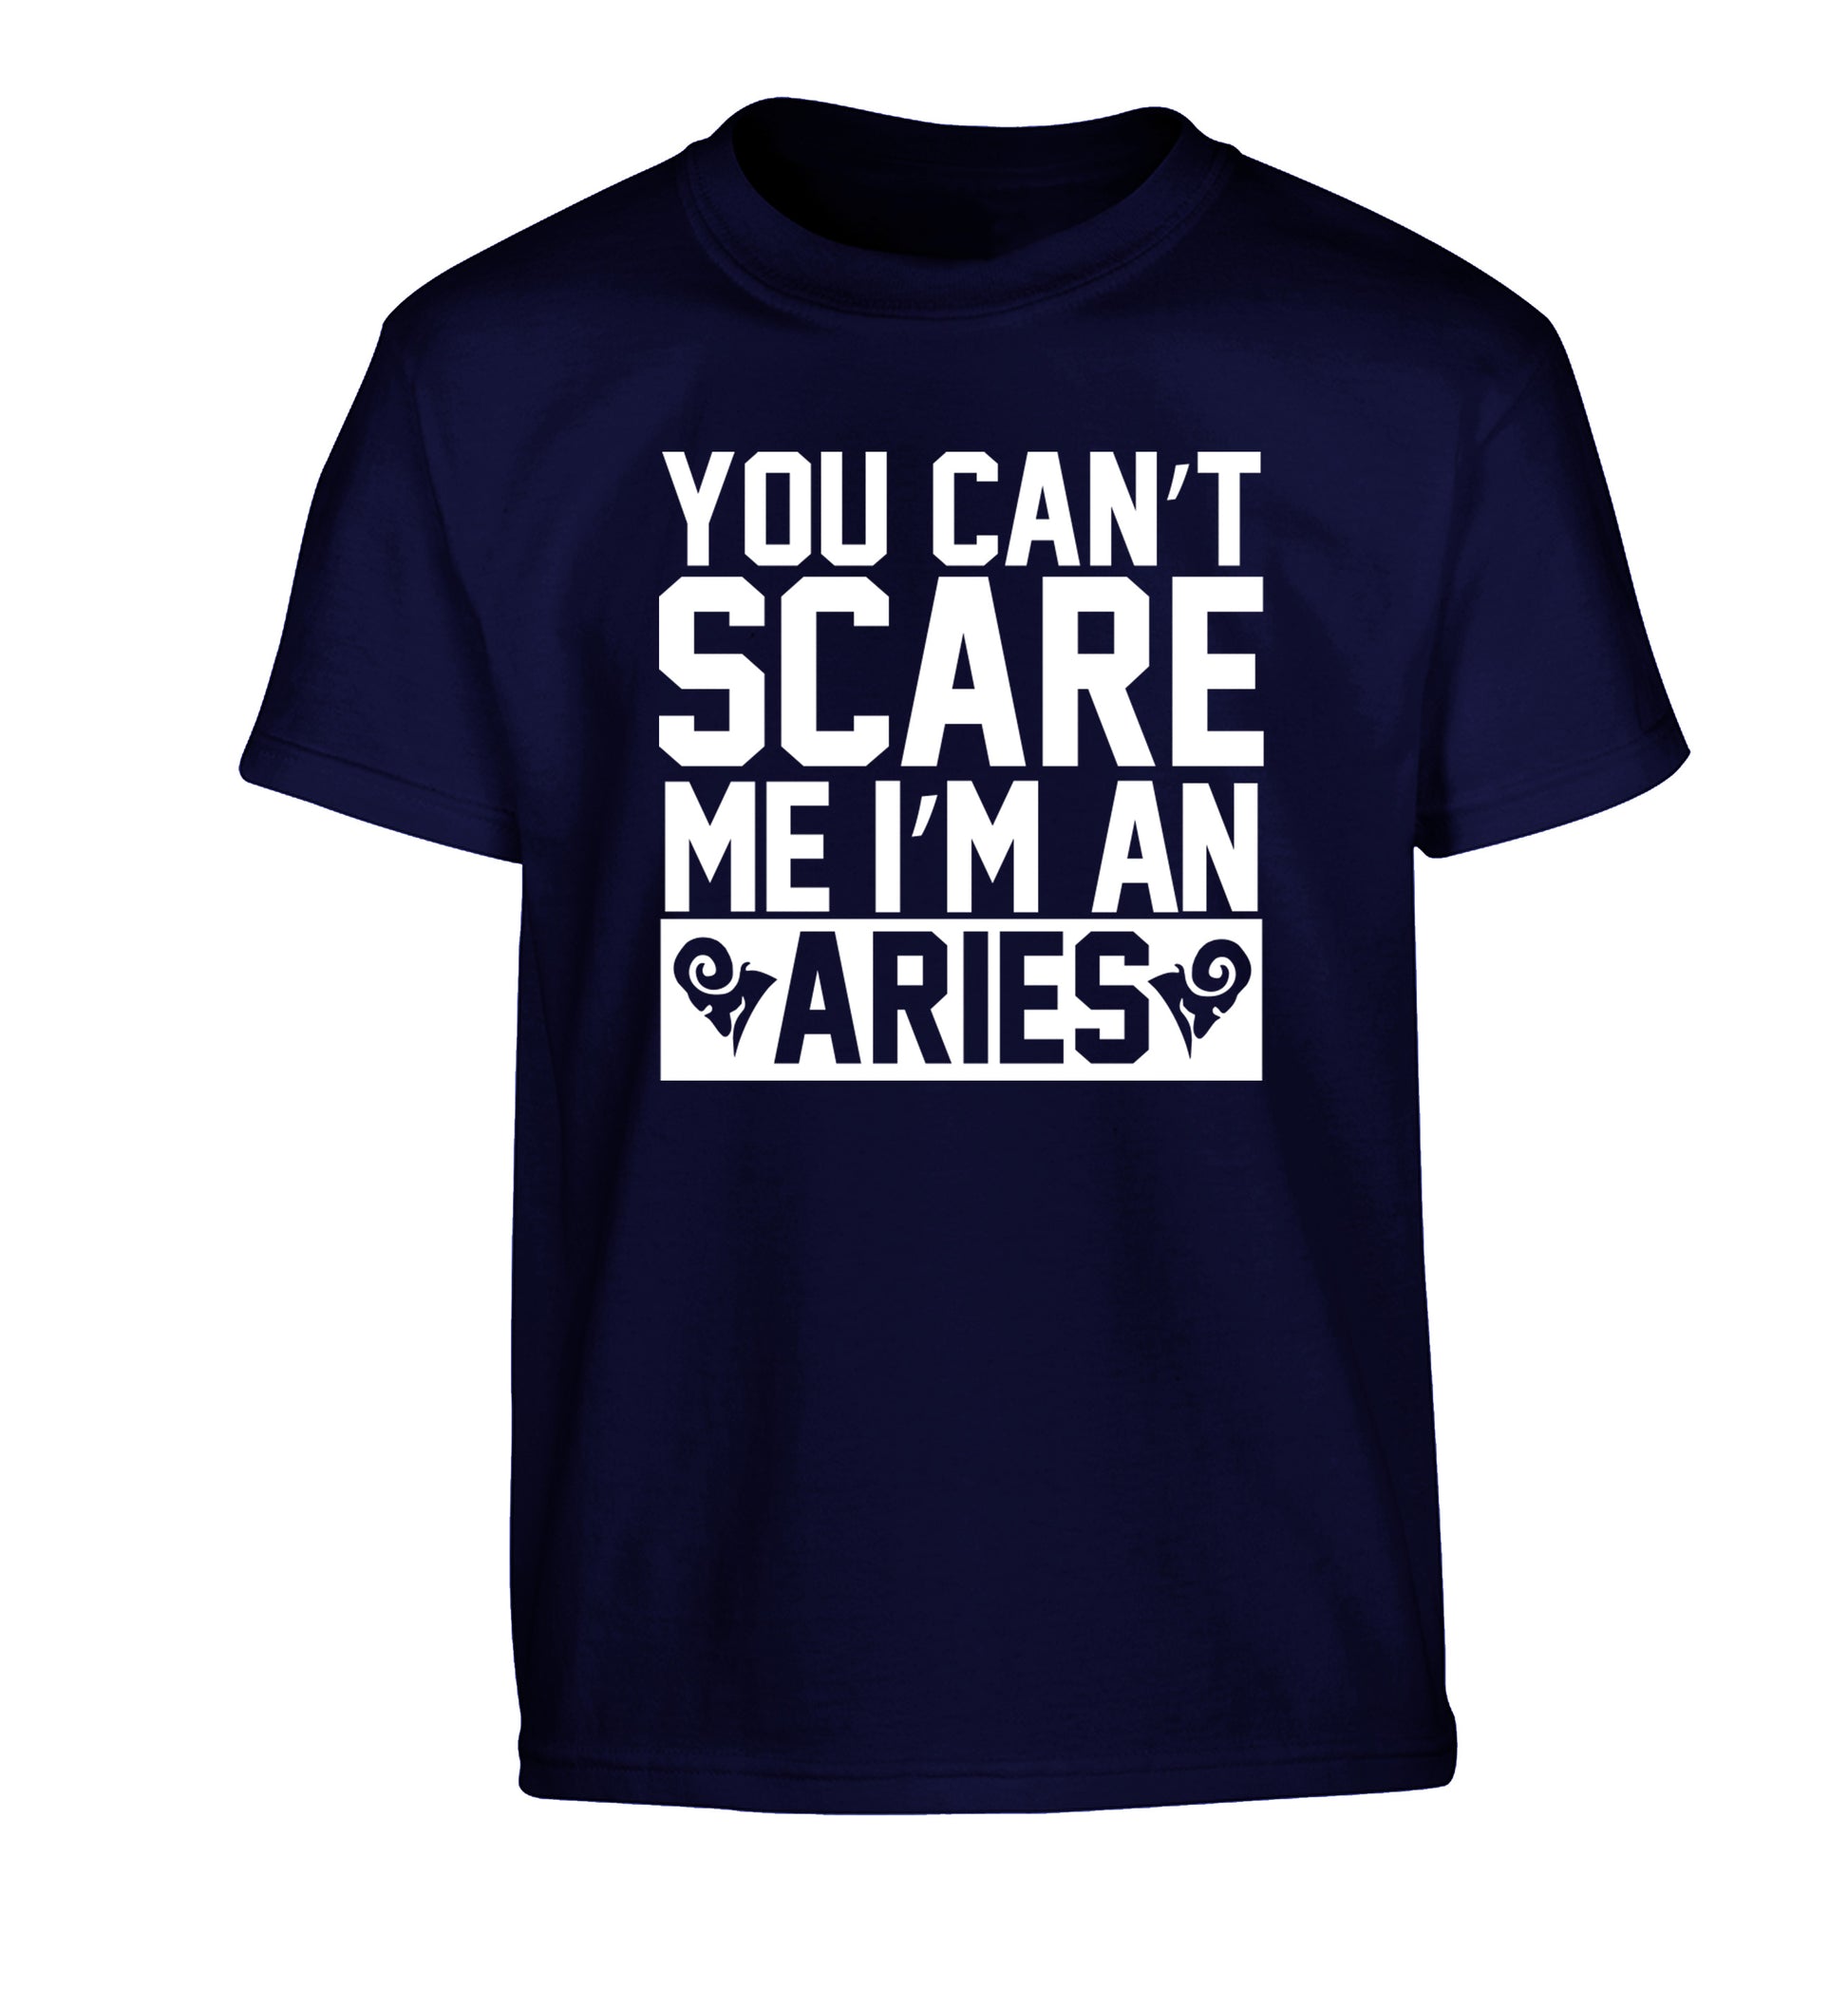 You can't scare me I'm an aries Children's navy Tshirt 12-13 Years